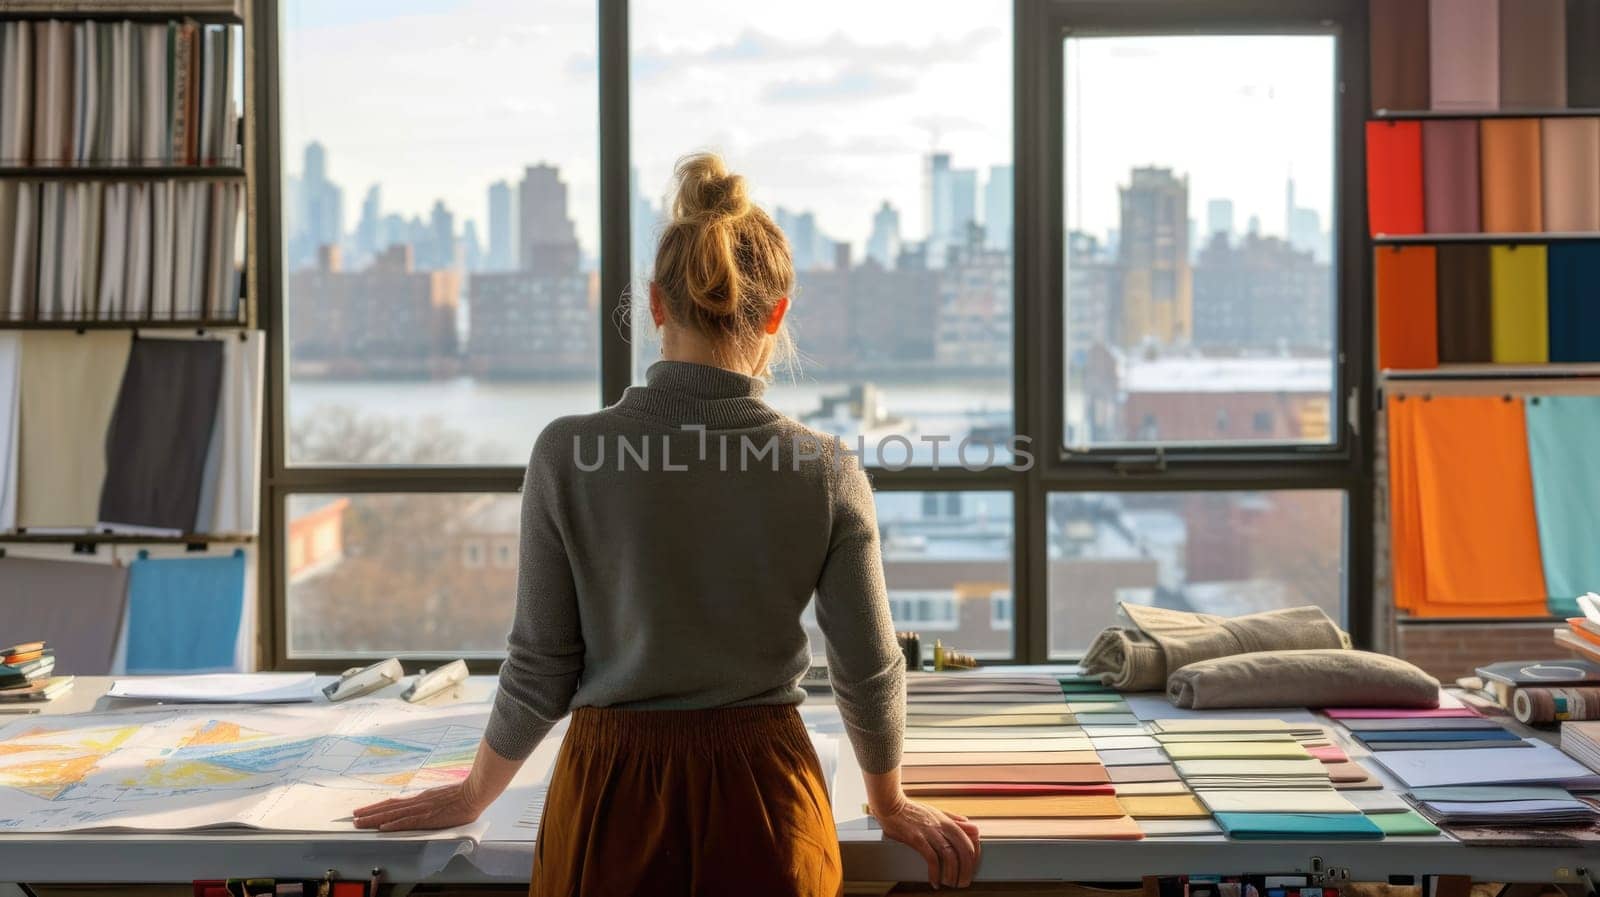 An interior designer is absorbed in evaluating various fabric samples spread across her studio table, with a backdrop of the cityscape outside. AIG41